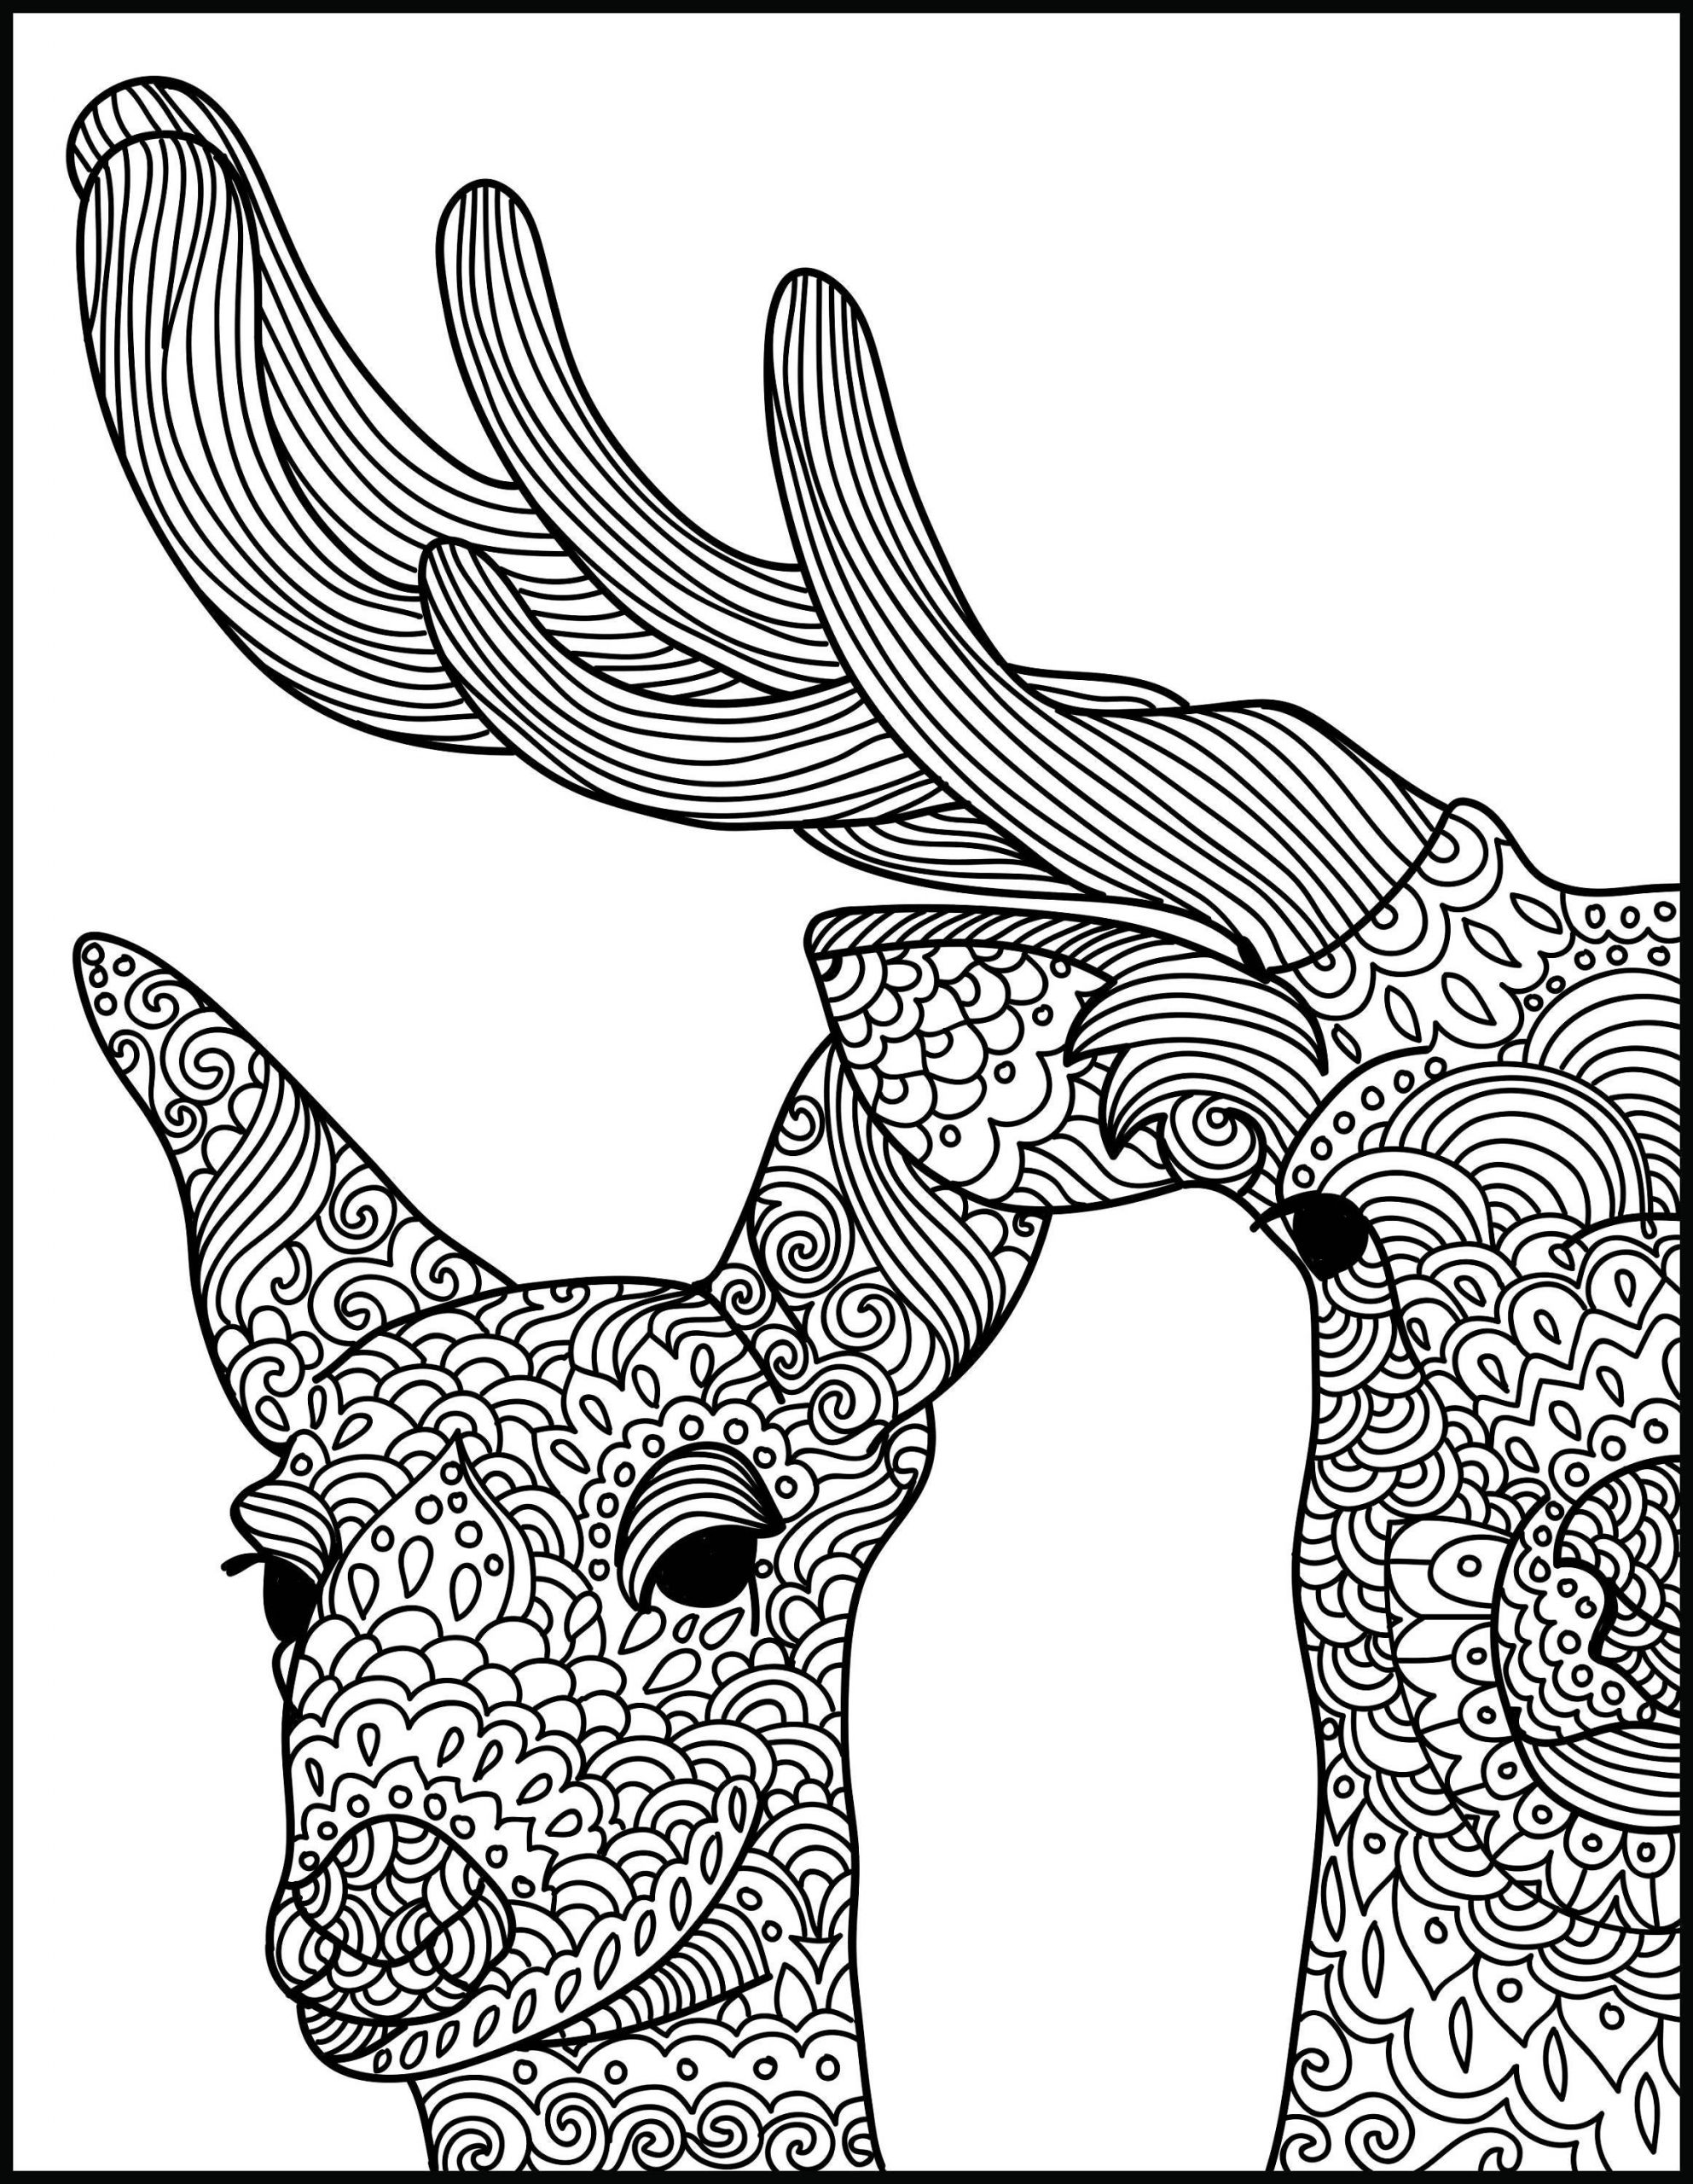 Deer Coloring Pages For Adults
 Animal Adult Coloring Page Deer Printable Coloring Page